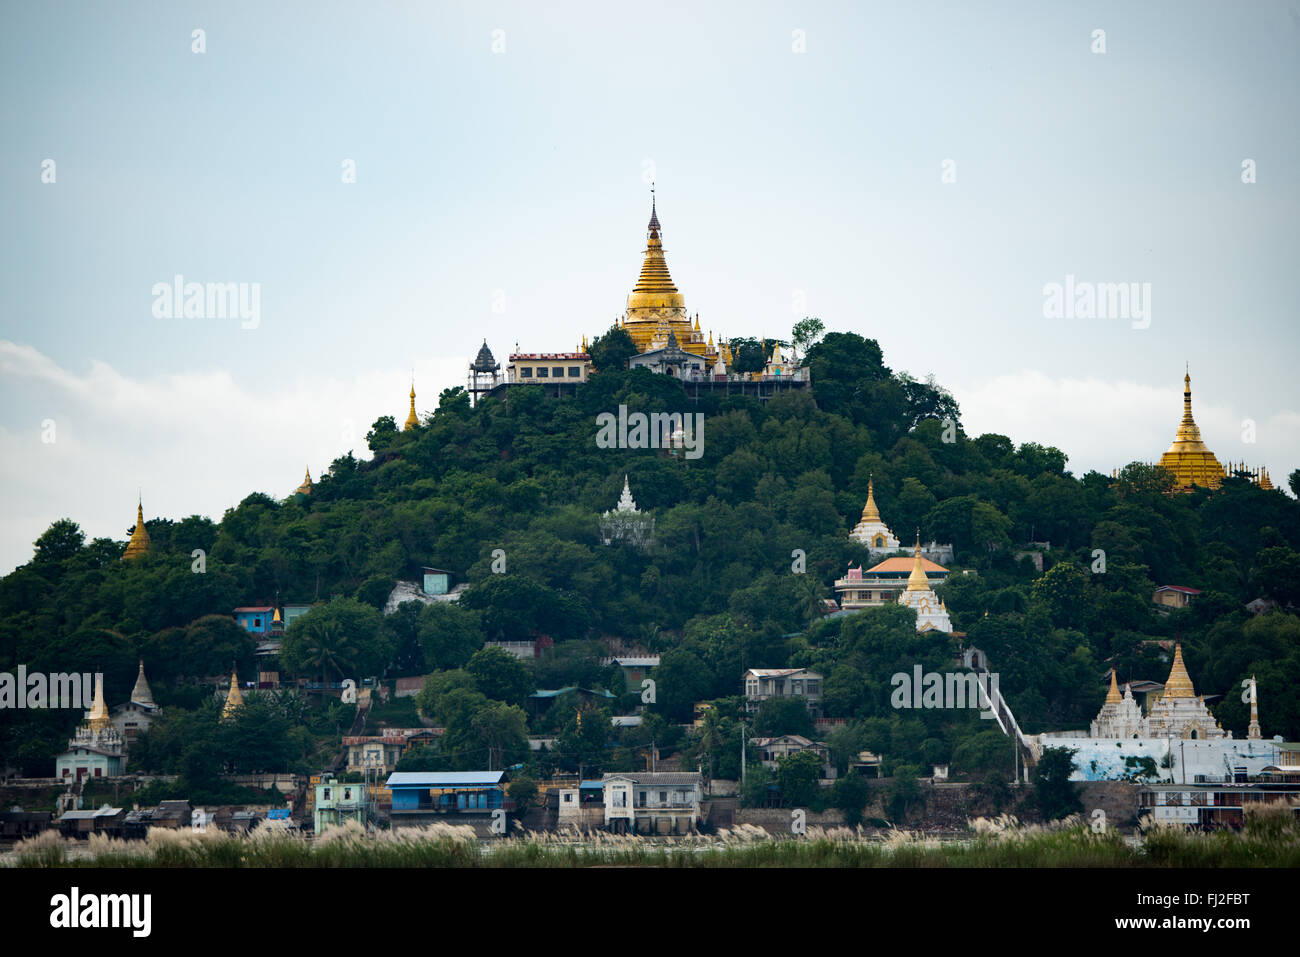 MANDALAY, Myanmar - The gold covered umbrella of on the many temples in the hills of Sagaing, near Mandalay, as seen from across the Ayeyarwaddy River. Stock Photo